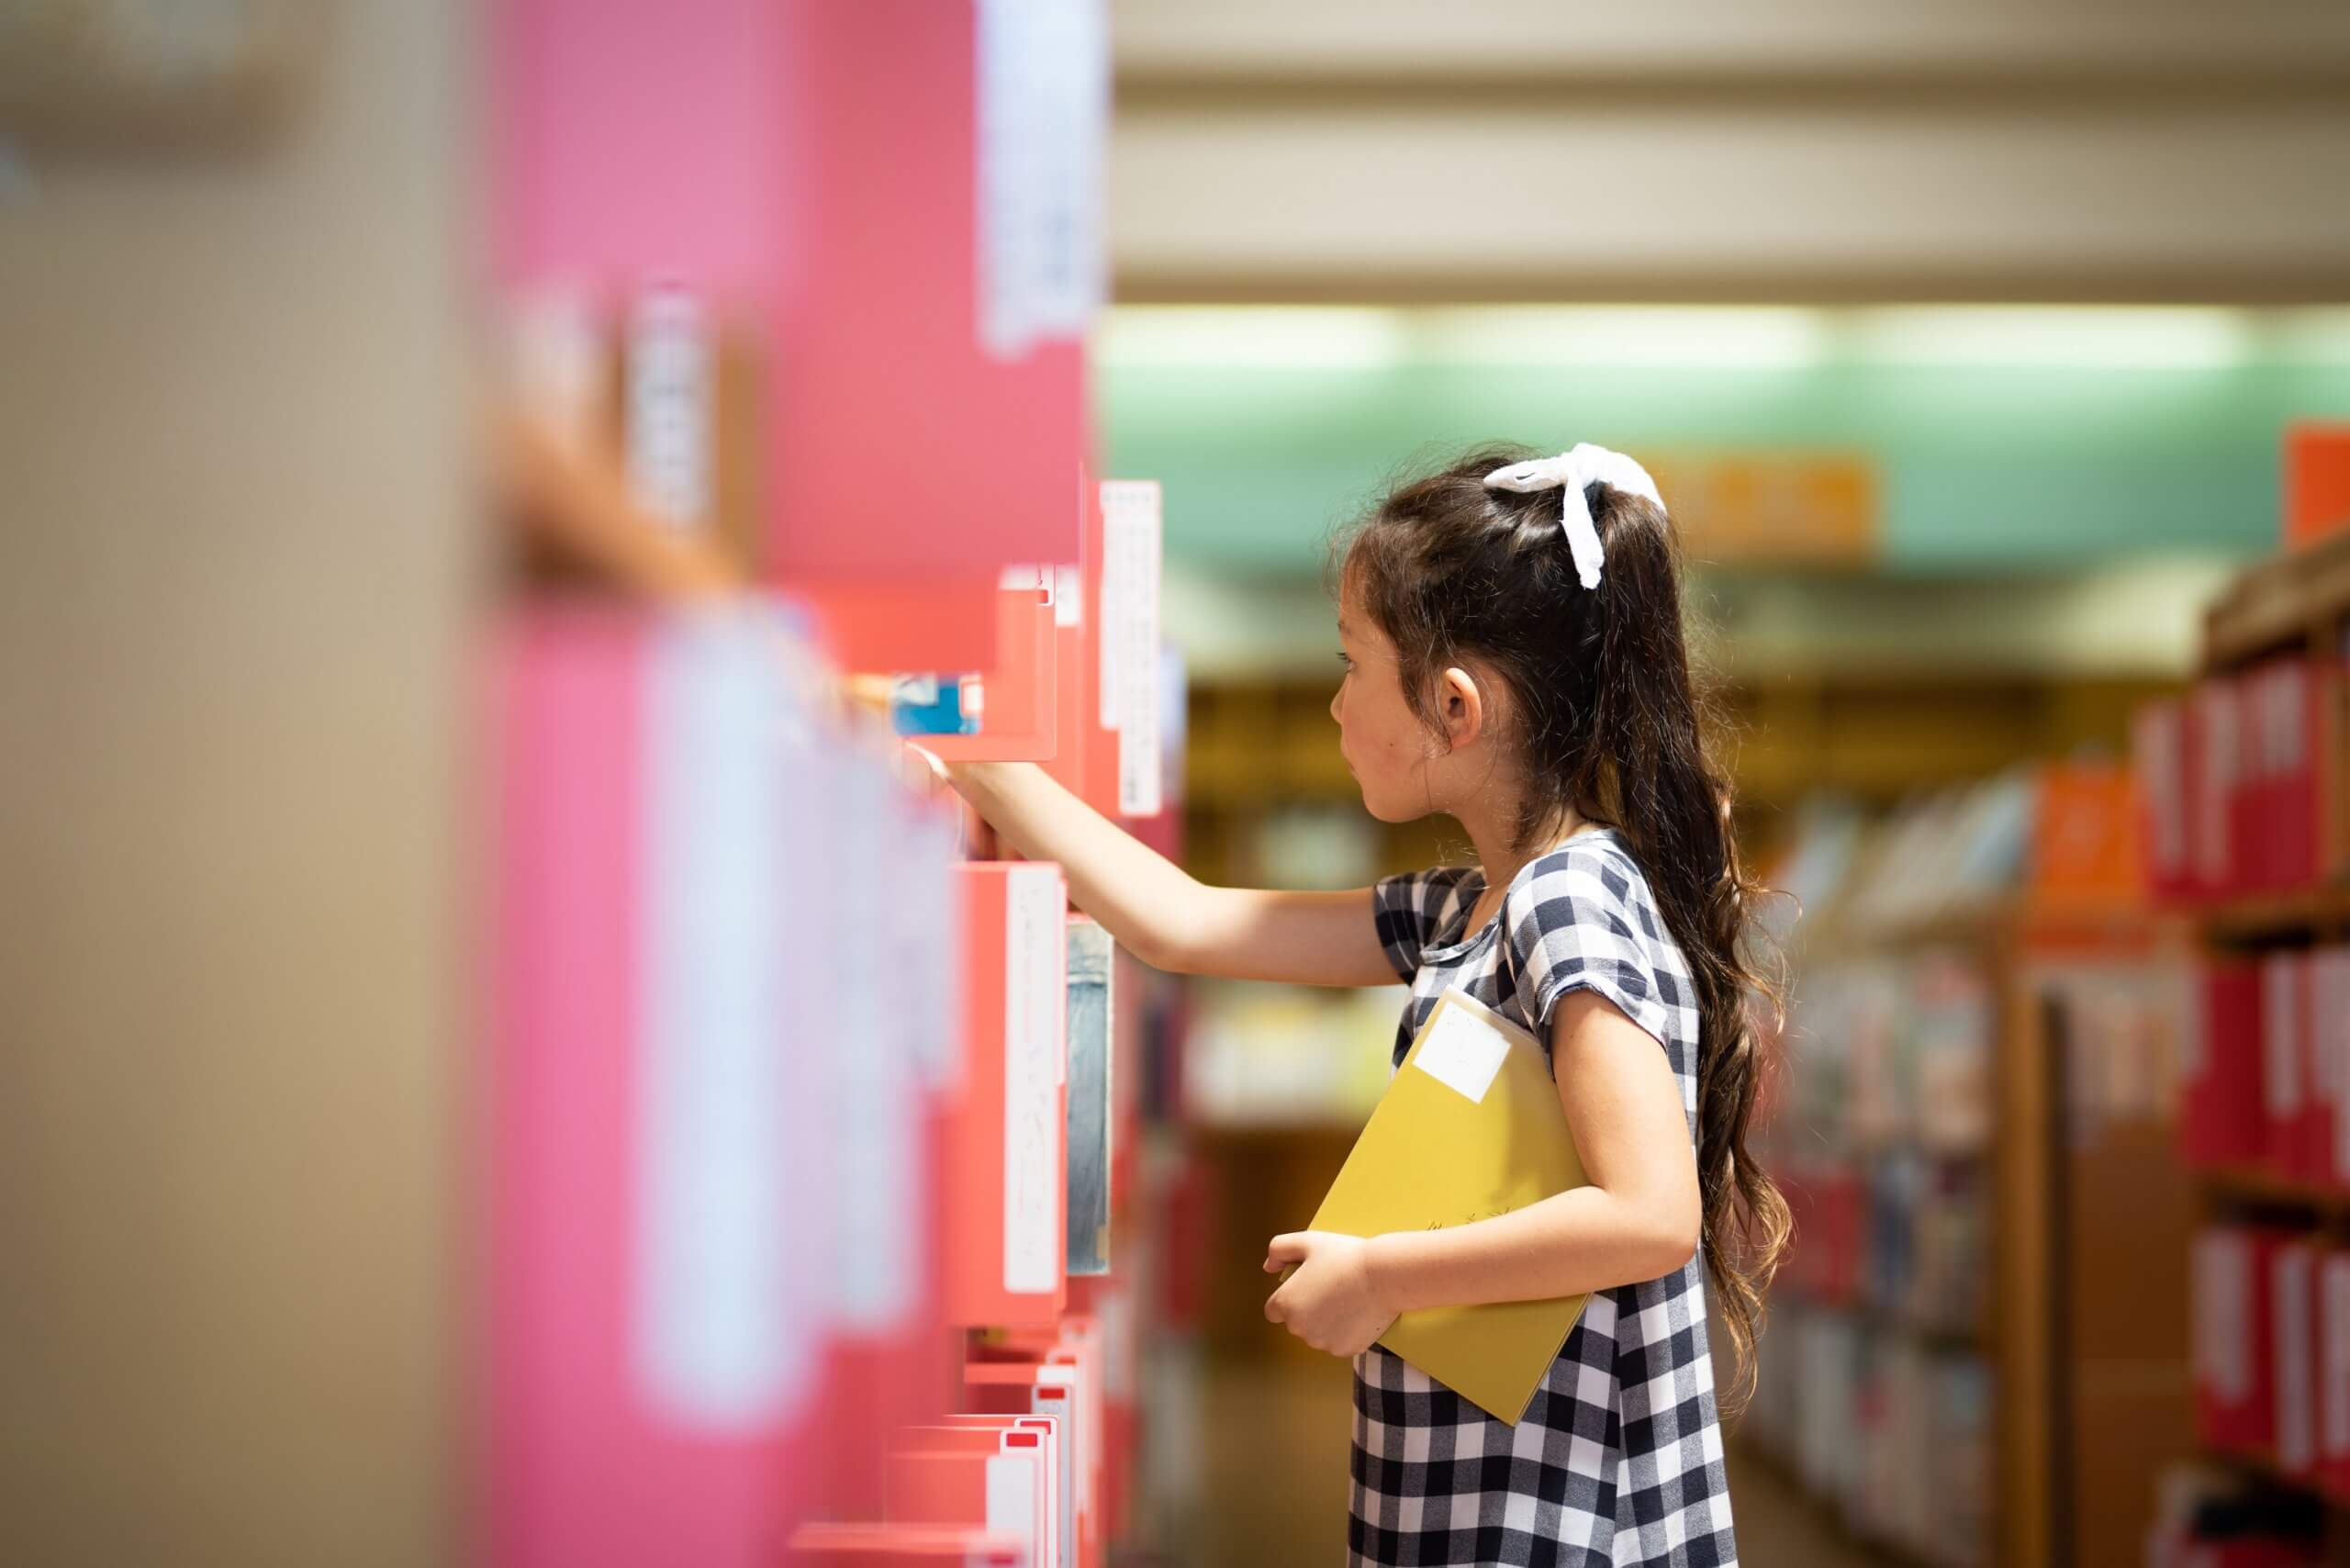 A young girl looking at books on a library shelf.